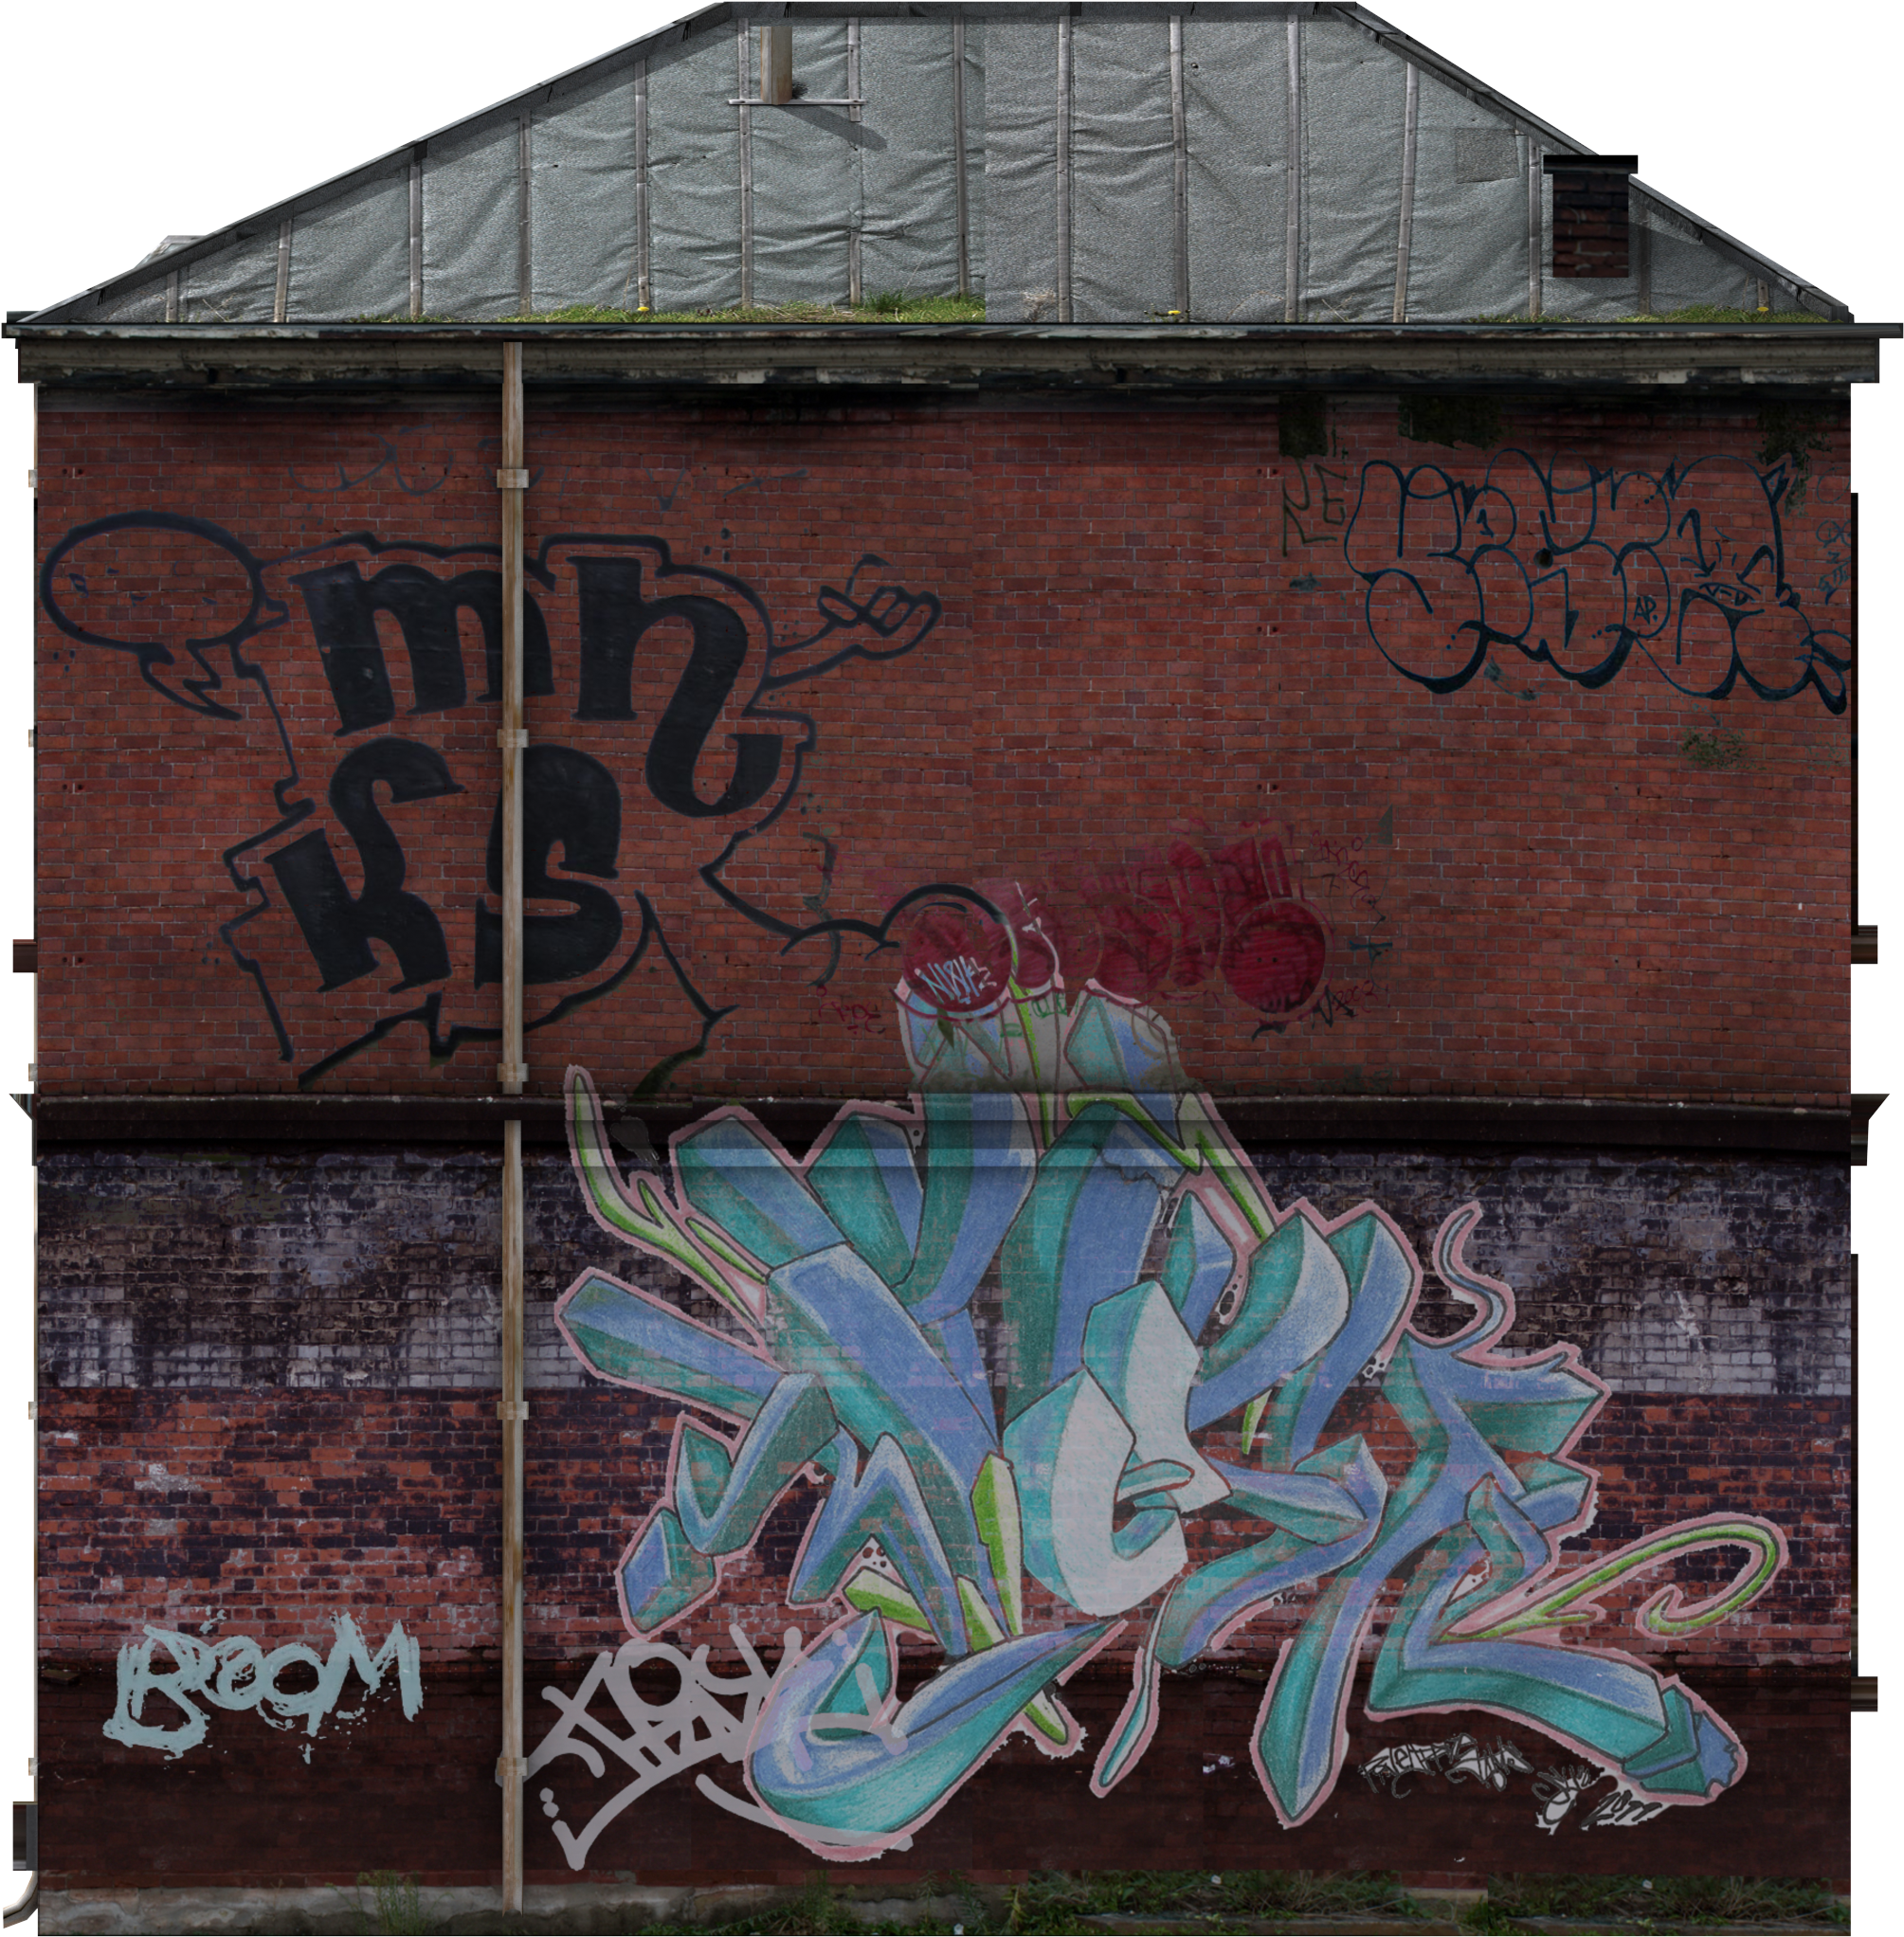 A Brick Building With Graffiti On It